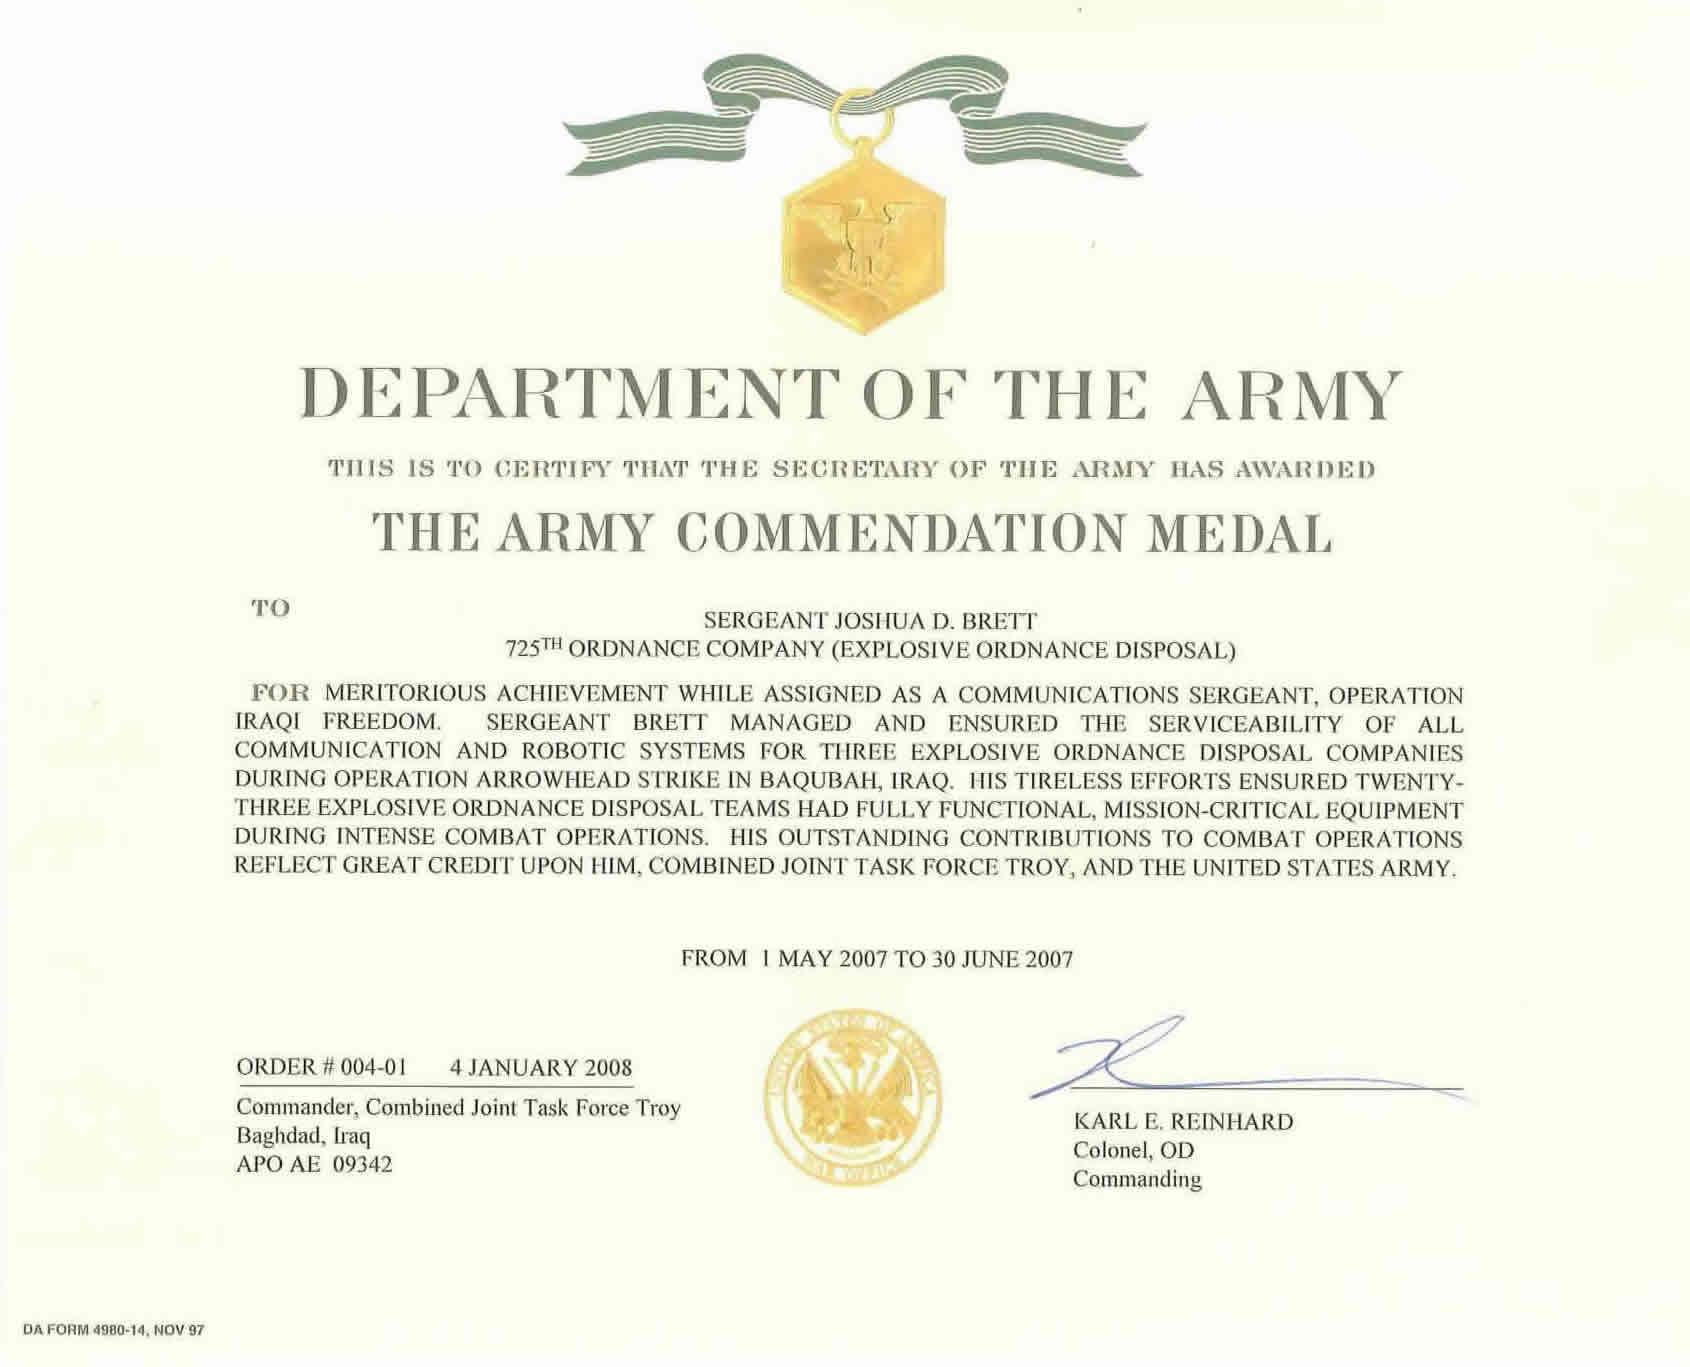 Army Commendation Medal 1